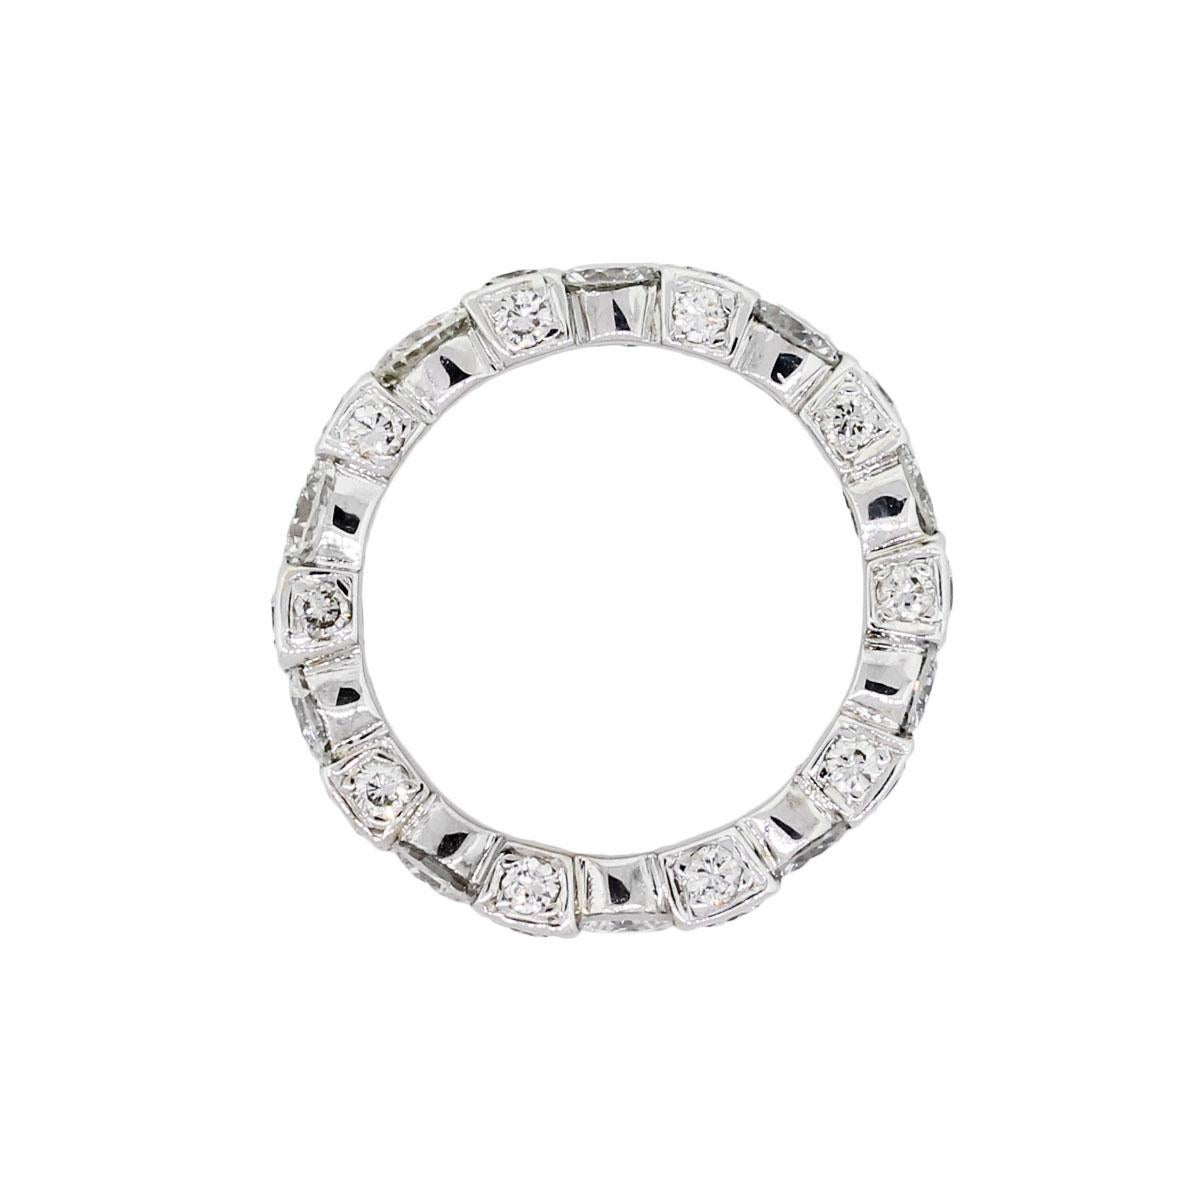 Material: 18k white gold
Diamond Details: Approx. 1.75ctw of round brilliant diamonds.
Ring Size: 5
Ring Measurements: 0.84″ x 0.15″ x 0.15″
Total Weight: 4.3g (2.8dwt)
Additional Details: This item comes with a presentation box!
SKU: R4976